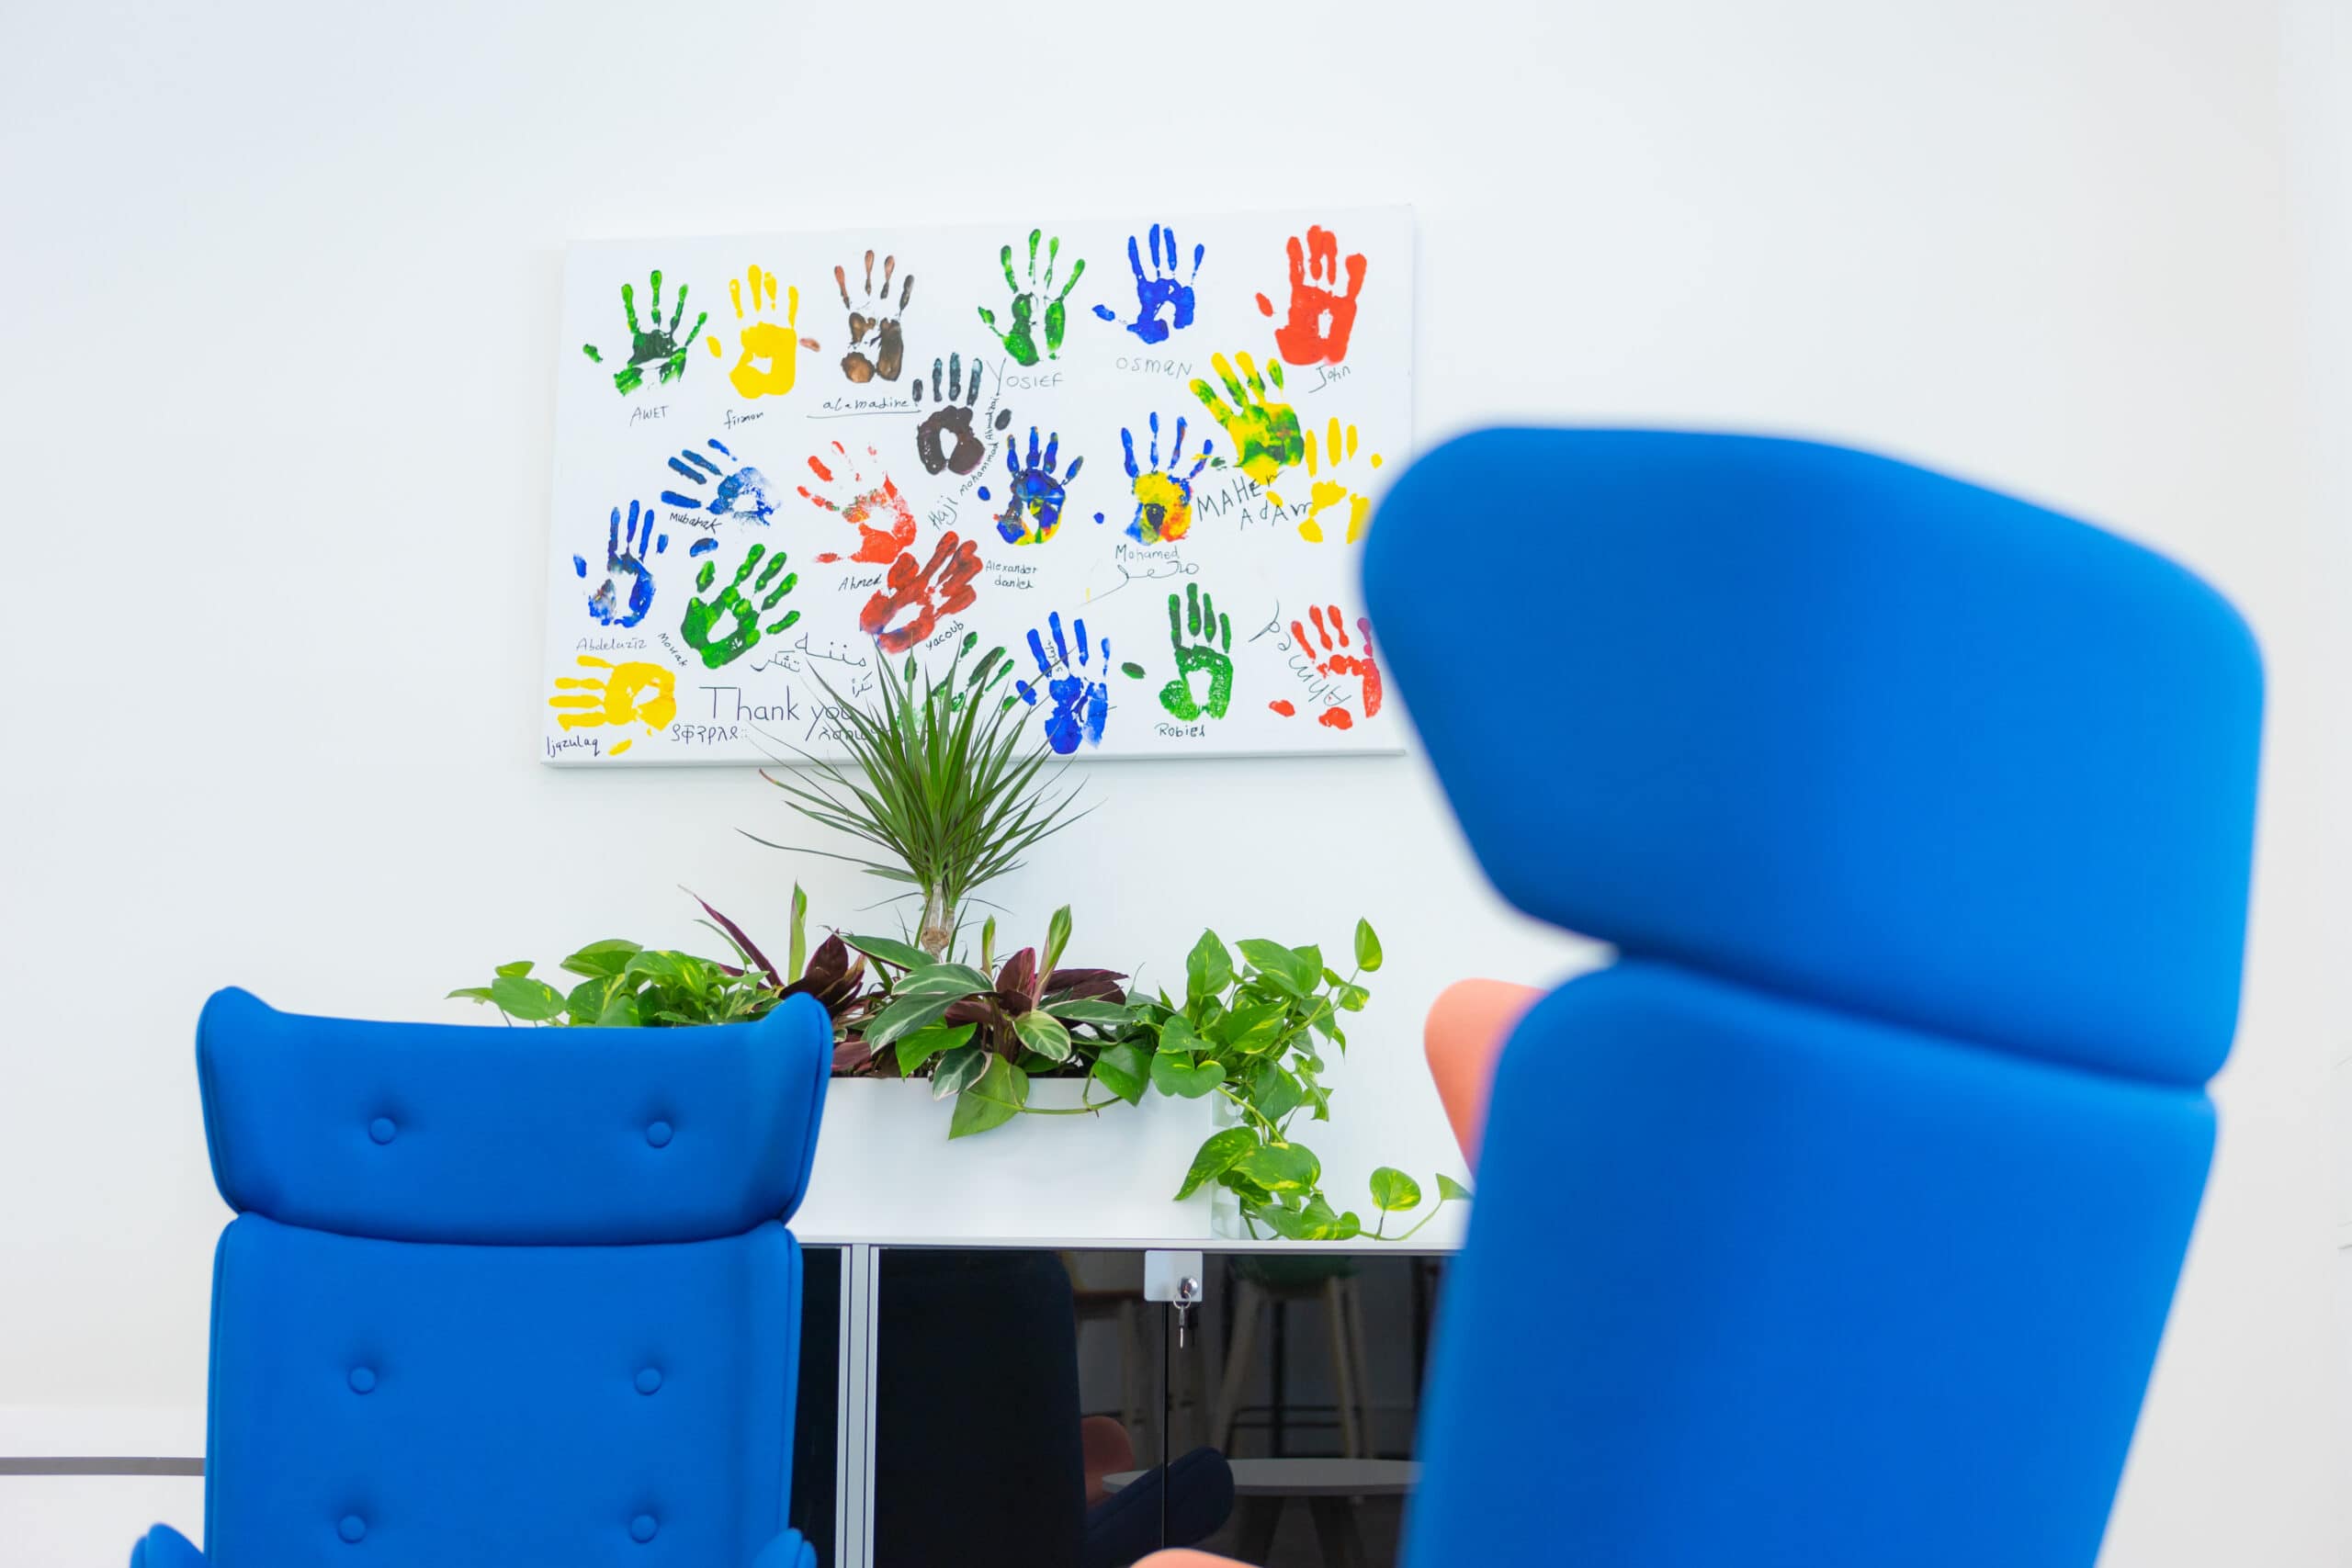 Two blue chairs are positioned in the background in front of a mural with colourful painted hand prints signed by the individuals who made them.